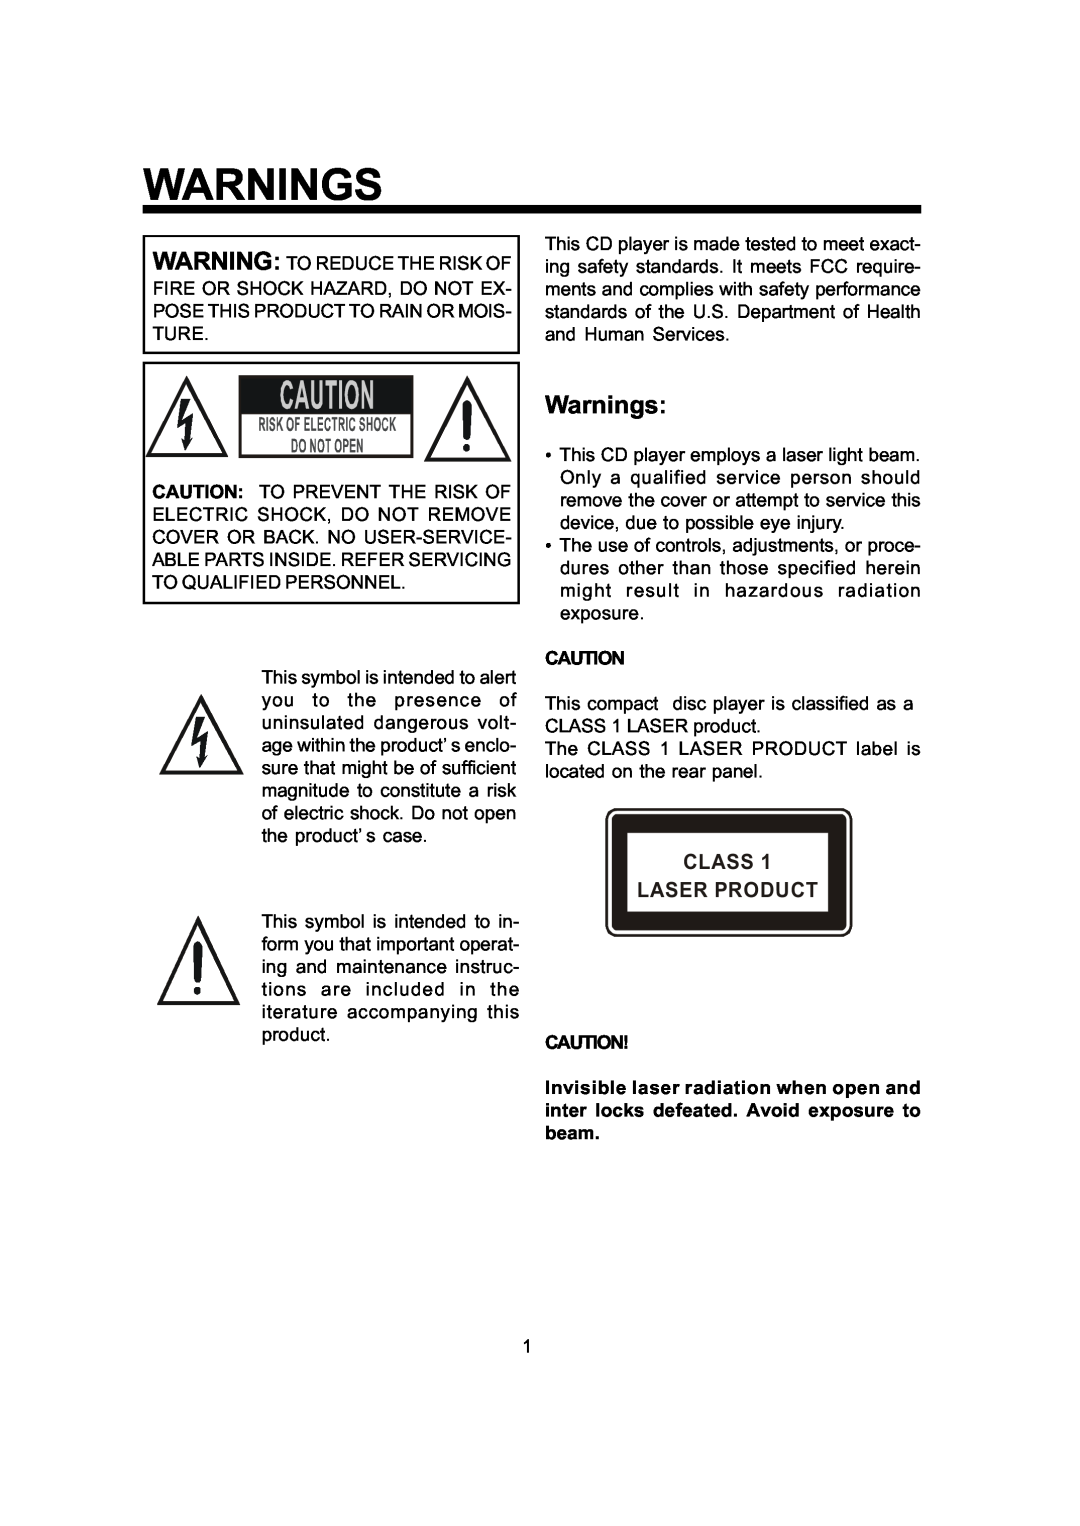 The Singing Machine SMG - 299 owner manual Warnings, Class Laser Product 